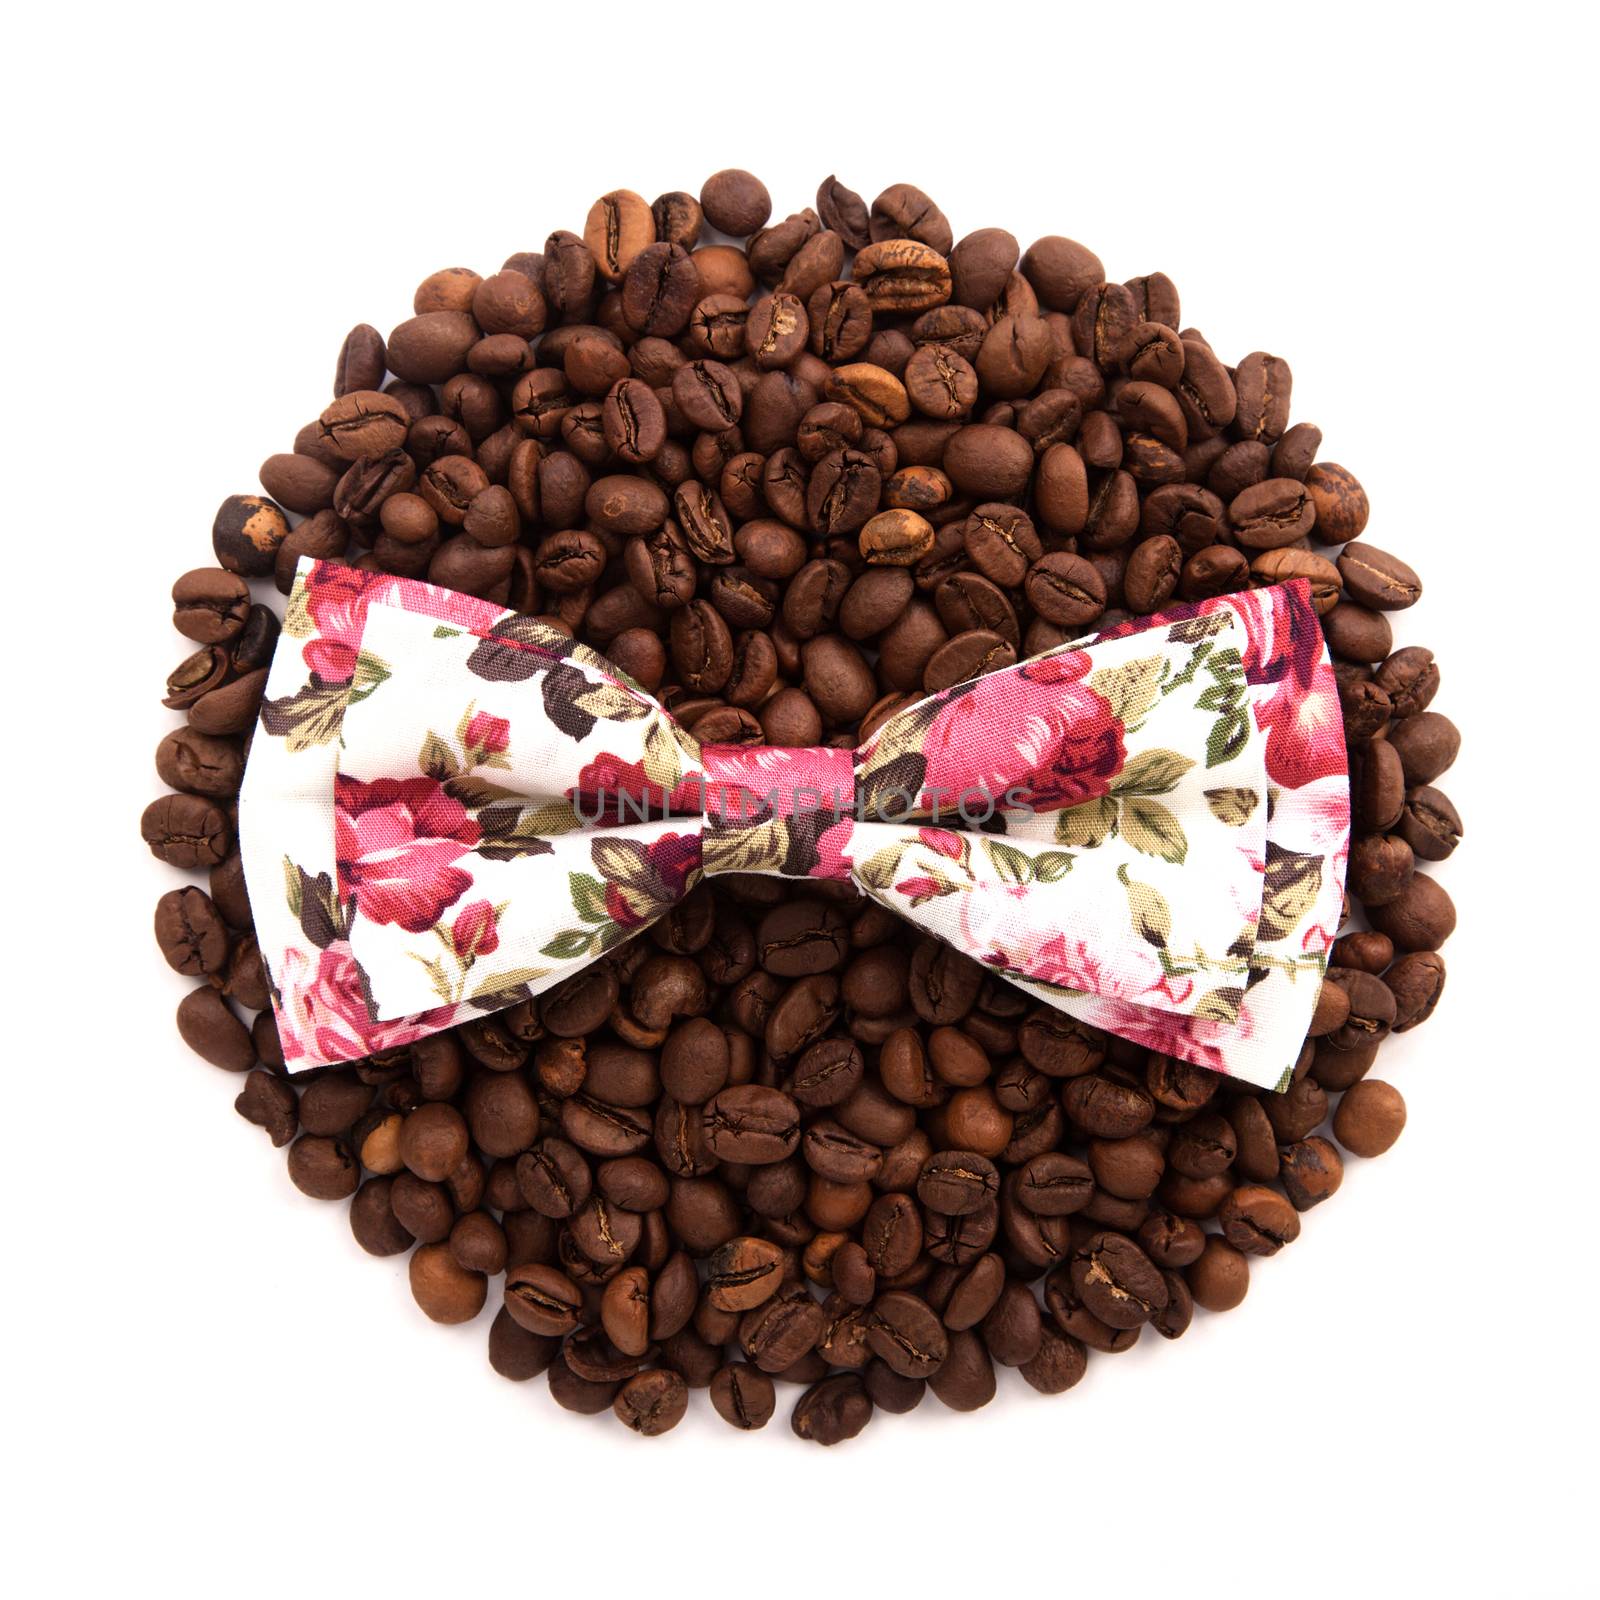 flower colors bow tie lie on the circle of coffee beans isolated on white background by traza